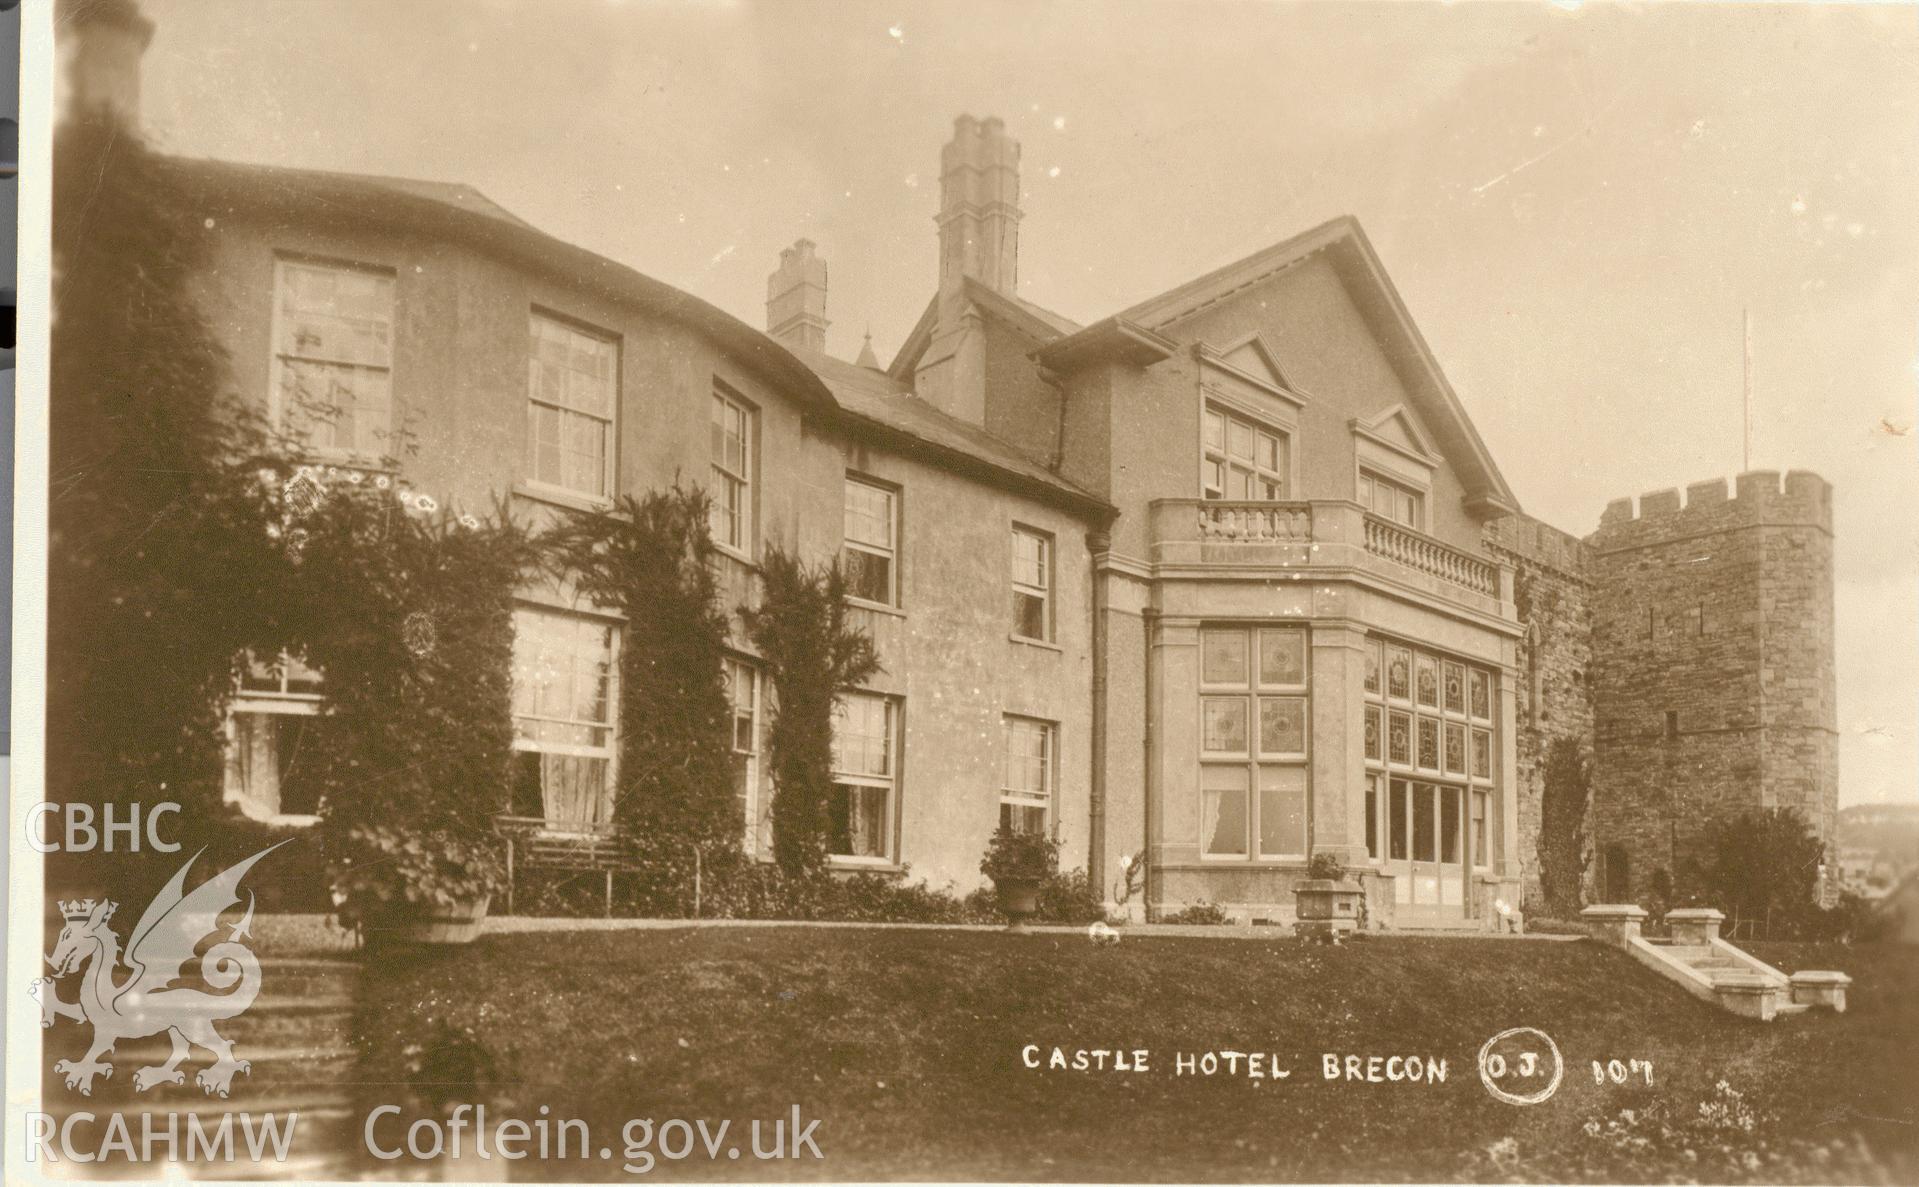 Digitised postcard image of Castle Hotel, Brecon, O. Jackson, Brecon. Produced by Parks and Gardens Data Services, from an original item in the Peter Davis Collection at Parks and Gardens UK. We hold only web-resolution images of this collection, suitable for viewing on screen and for research purposes only. We do not hold the original images, or publication quality scans.